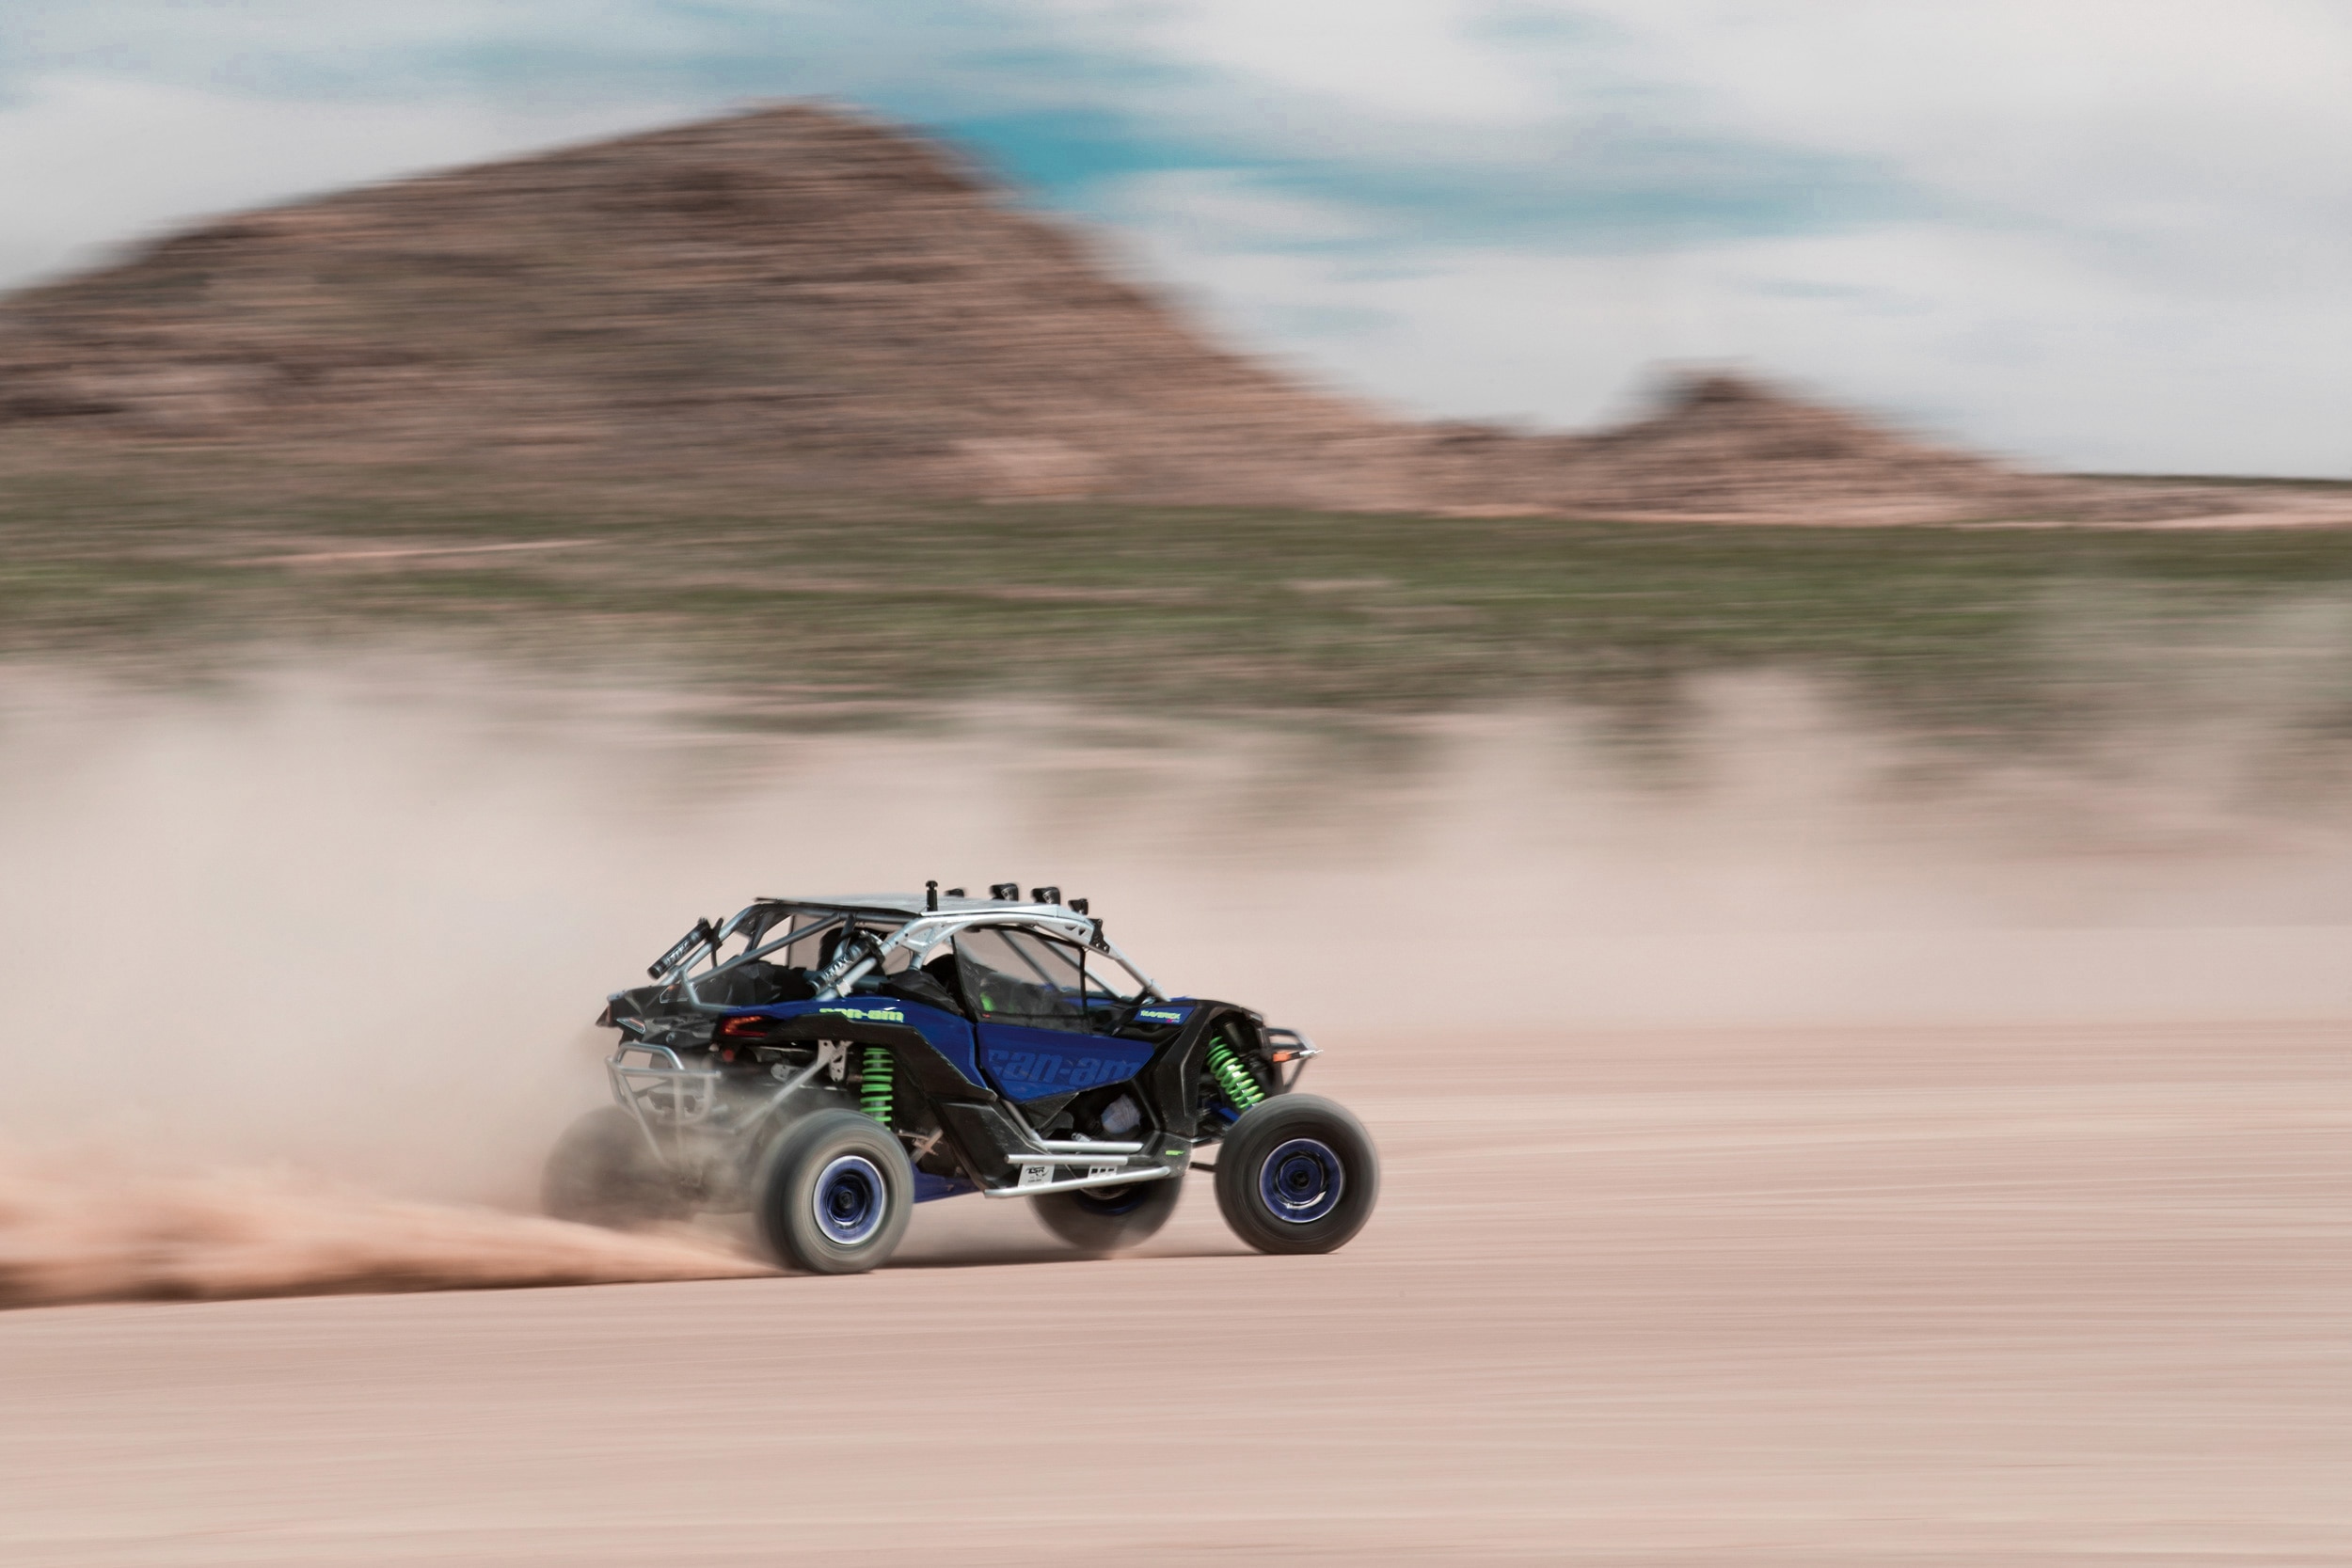 A Can-Am Maverick X3 X rs side-by-side at full speed in the desert